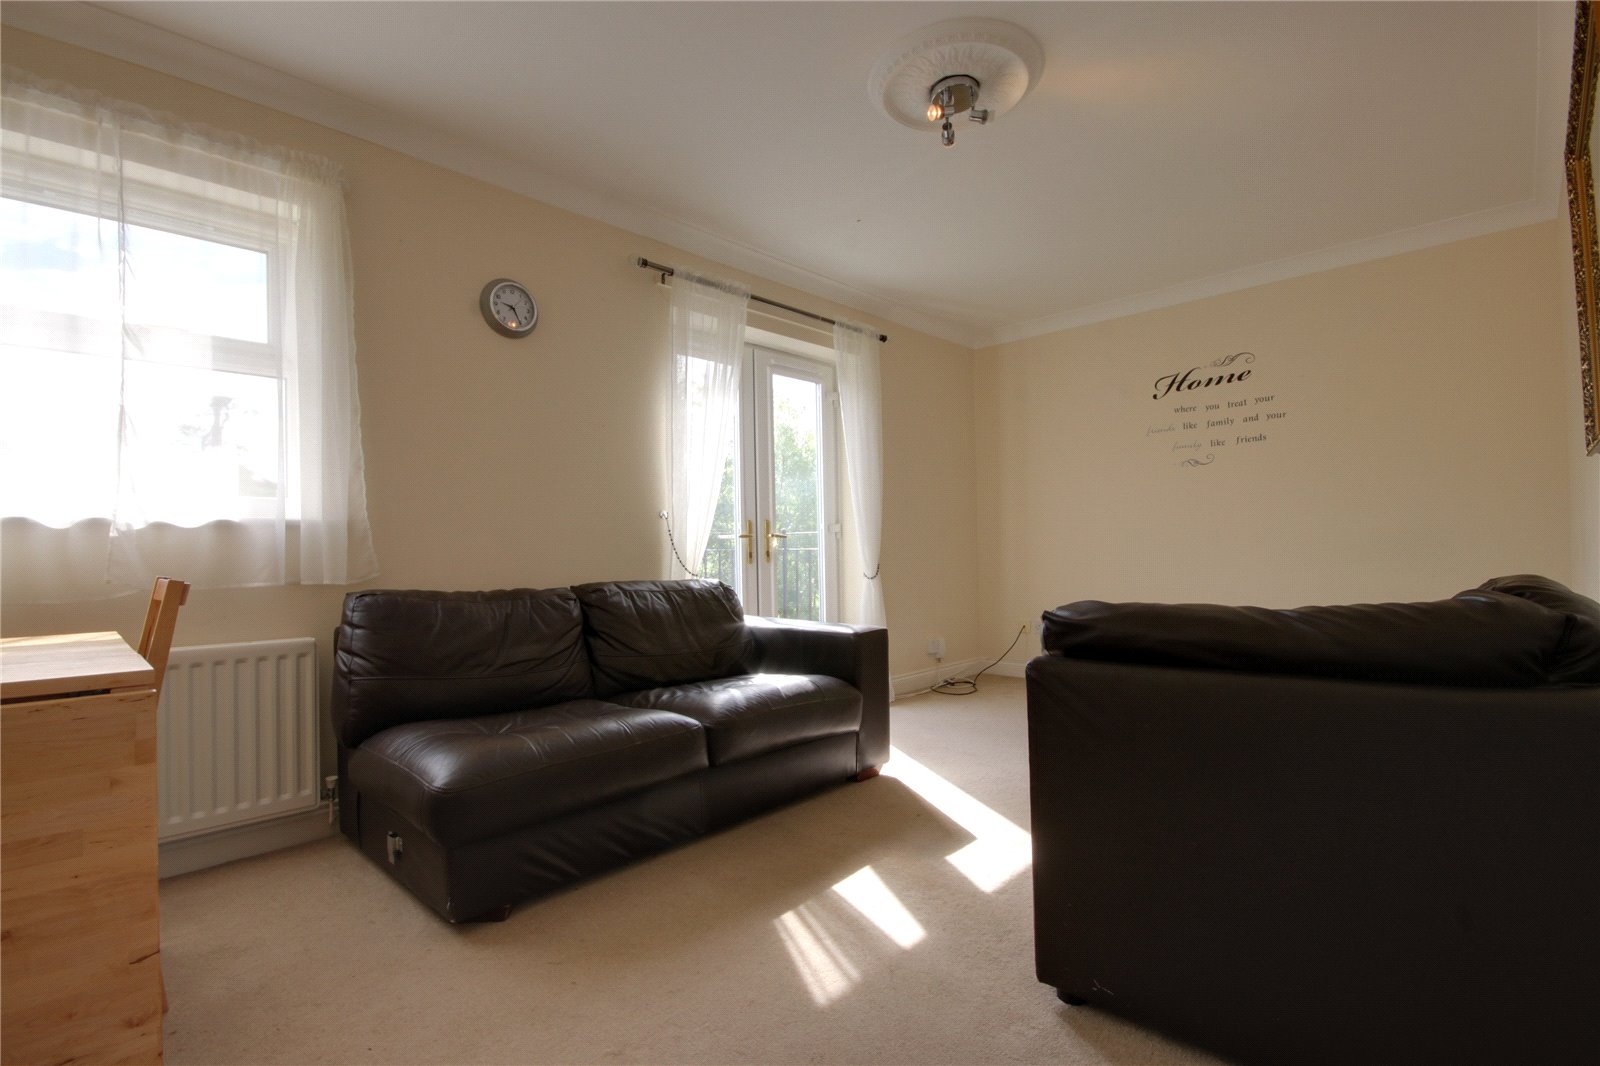 2 bed apartment to rent  - Property Image 5